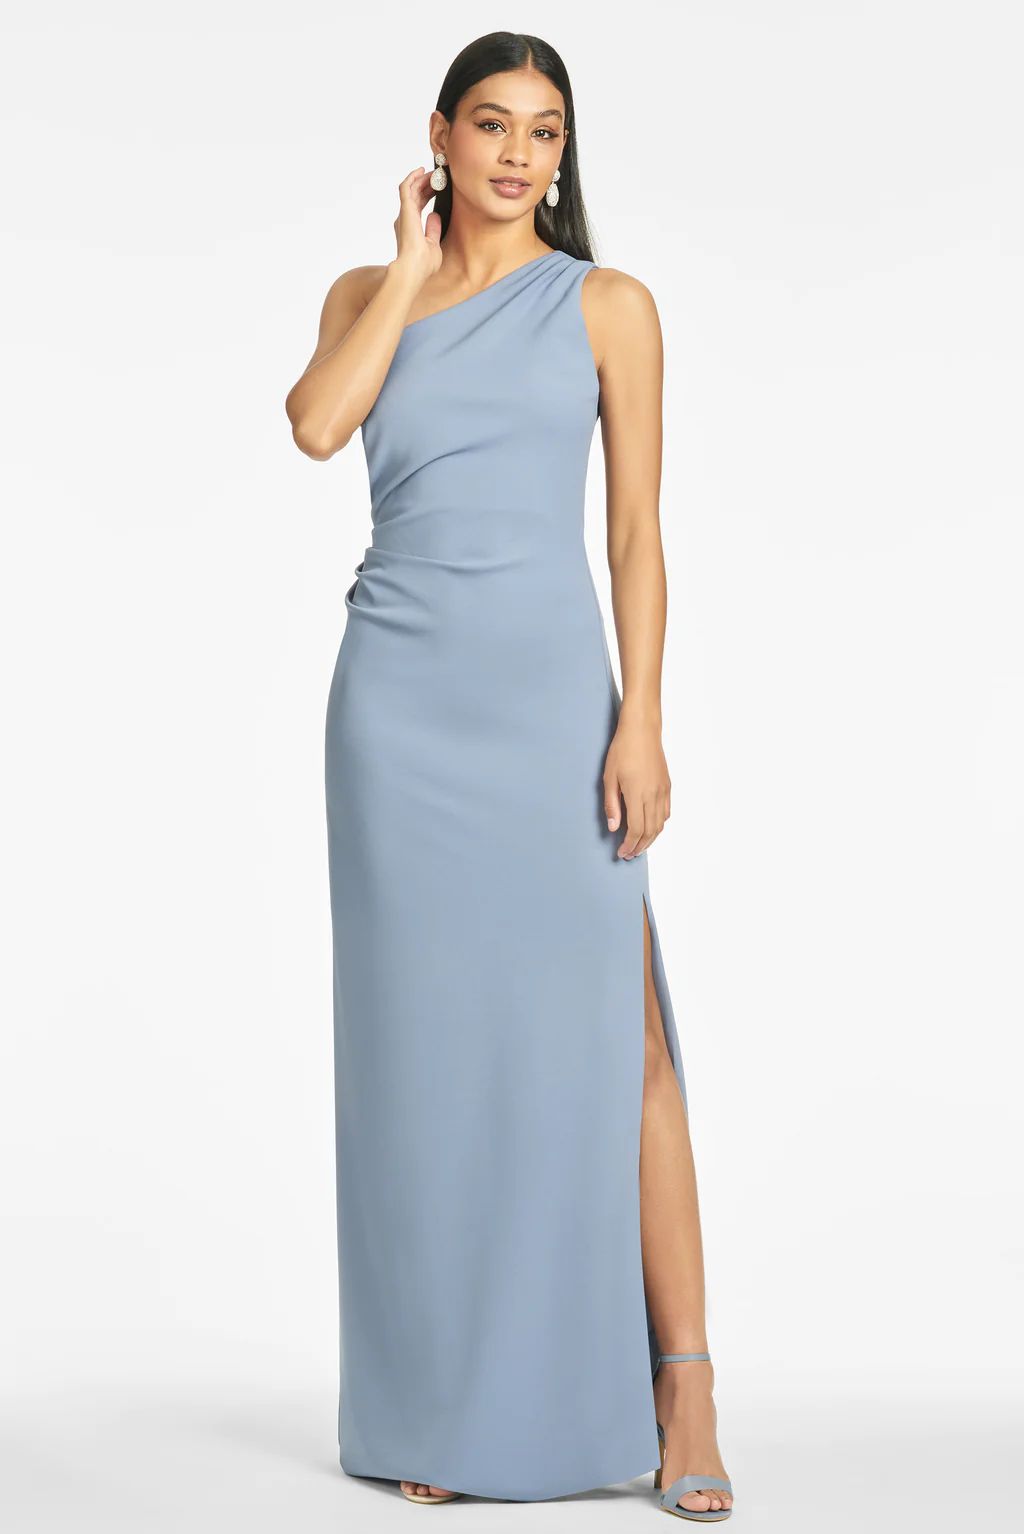 Cece 4-Way Stretch Crepe Gown - Slate Blue | Sachin and Babi